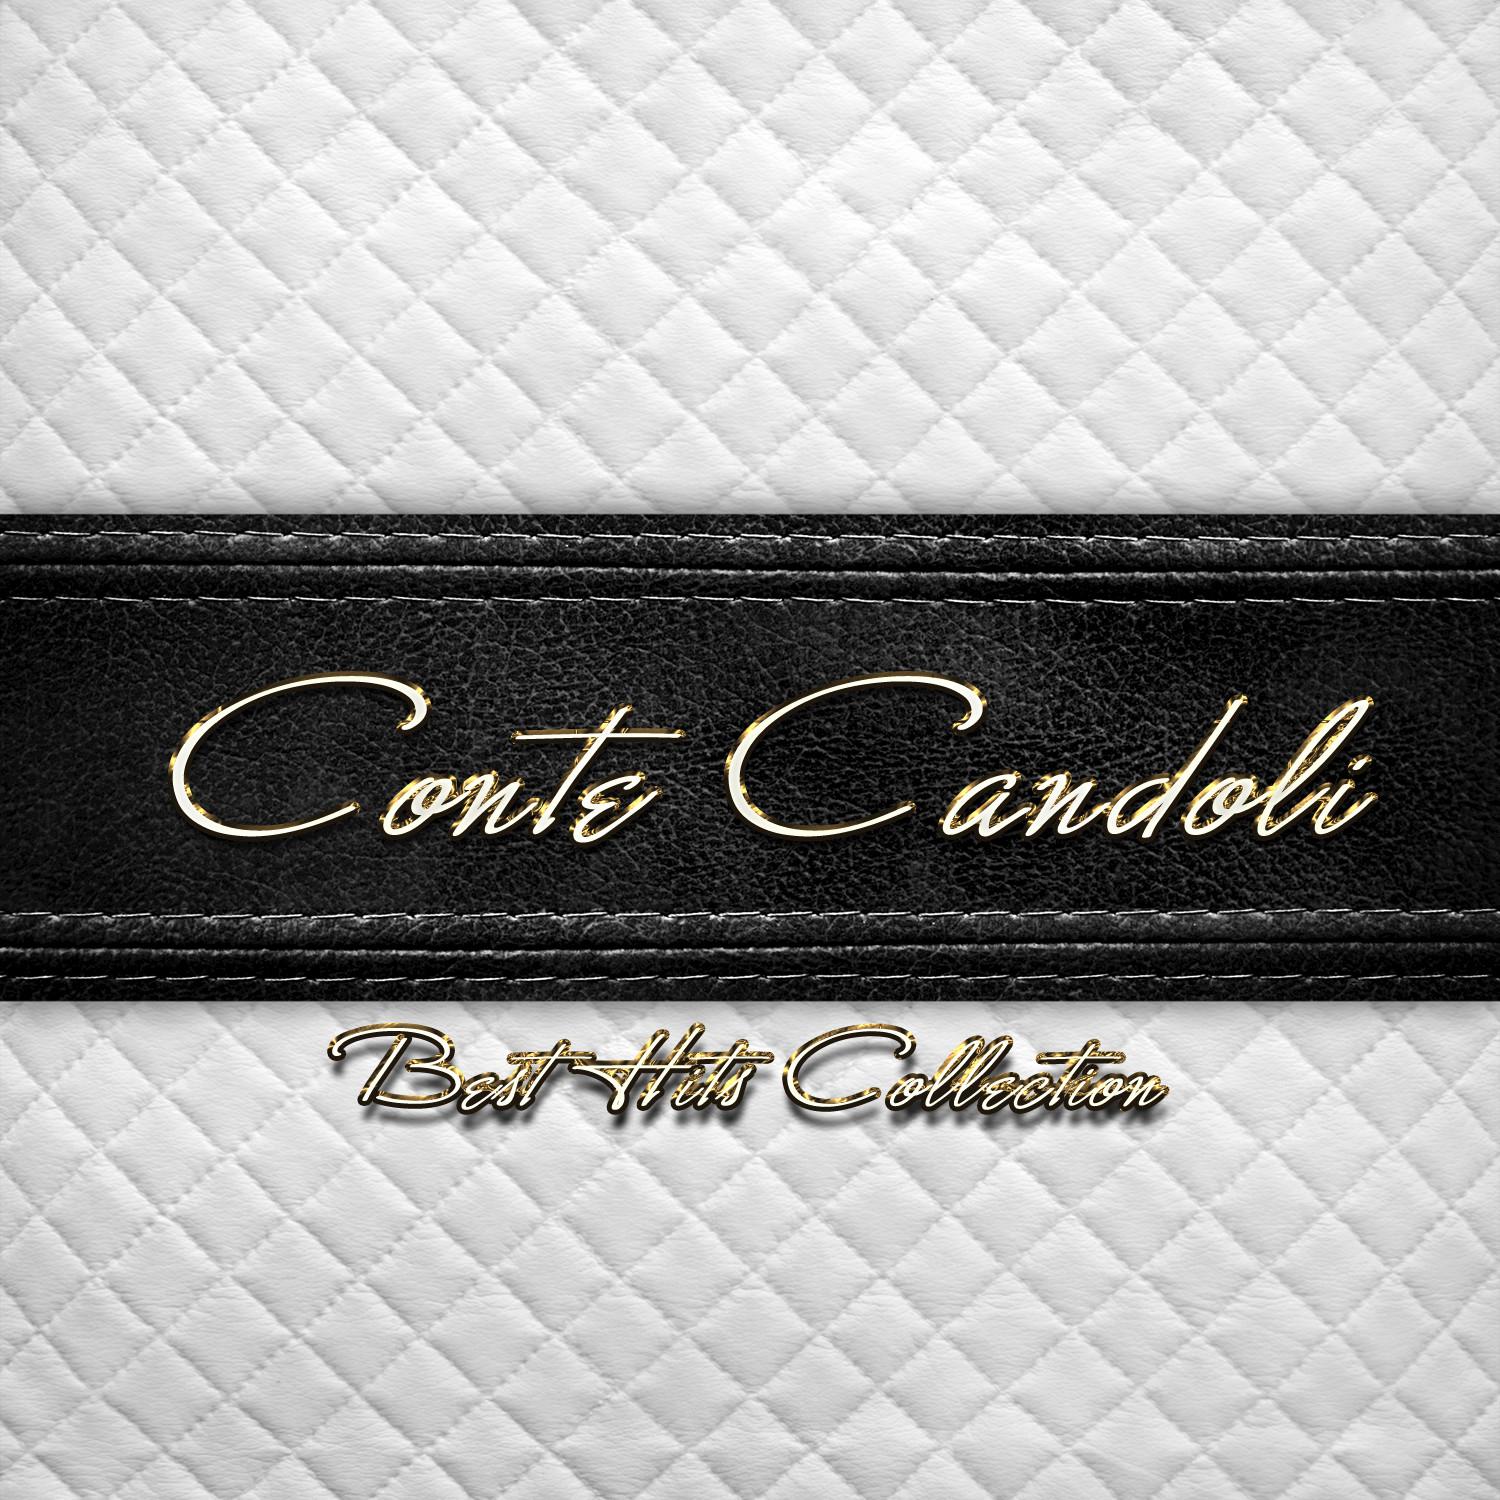 Best Hits Collection of Conte Candoli